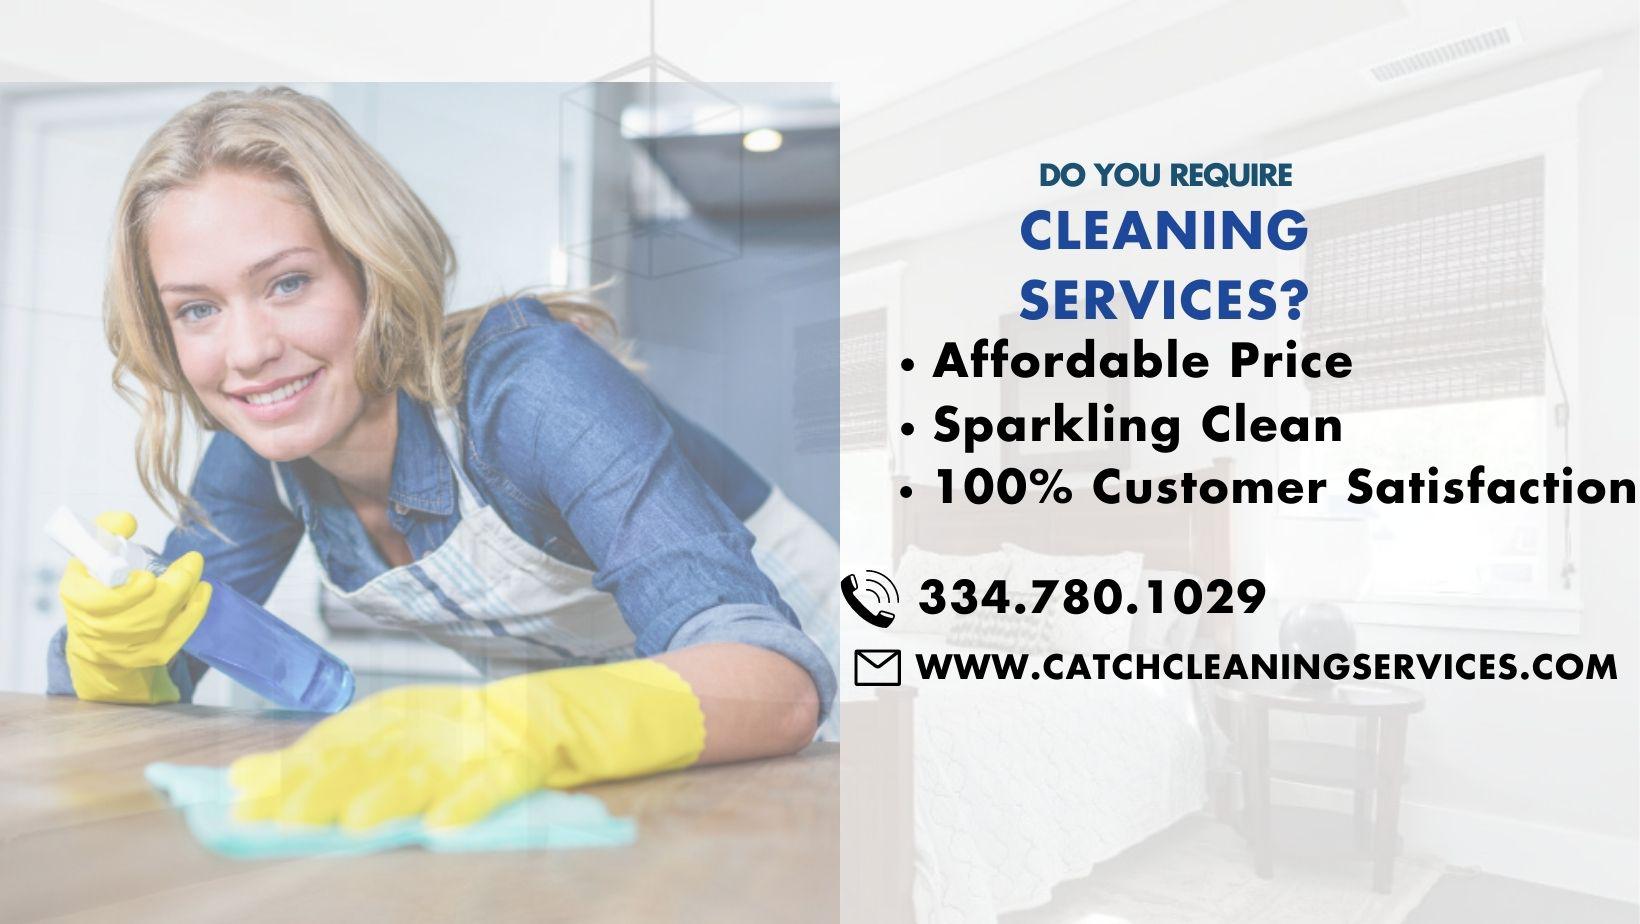 Catch Cleaning Services